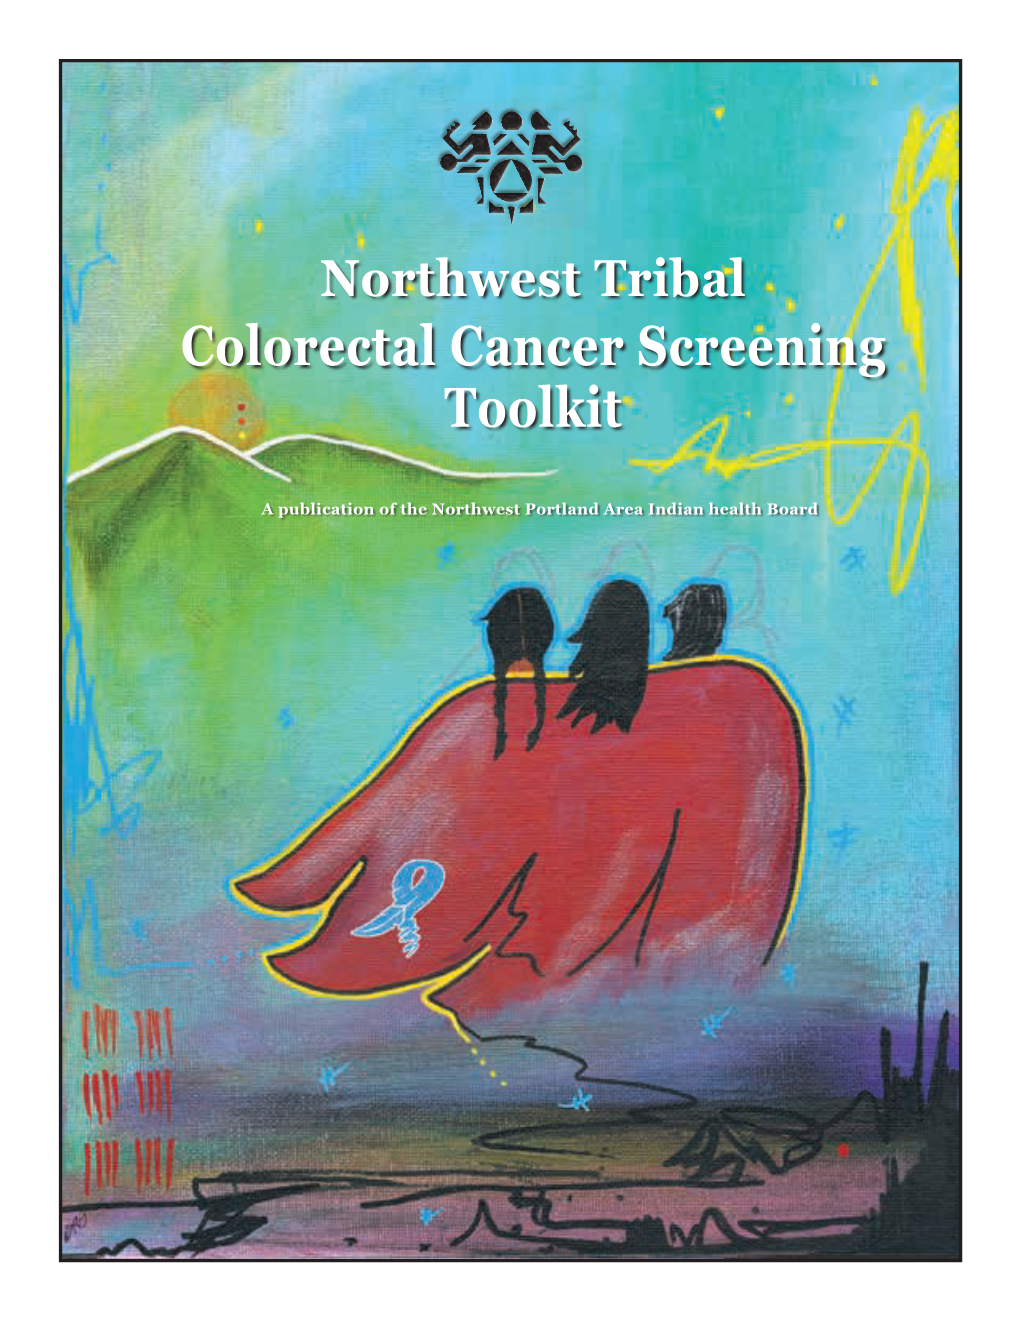 Northwest Tribal Colorectal Cancer Screening Toolkit